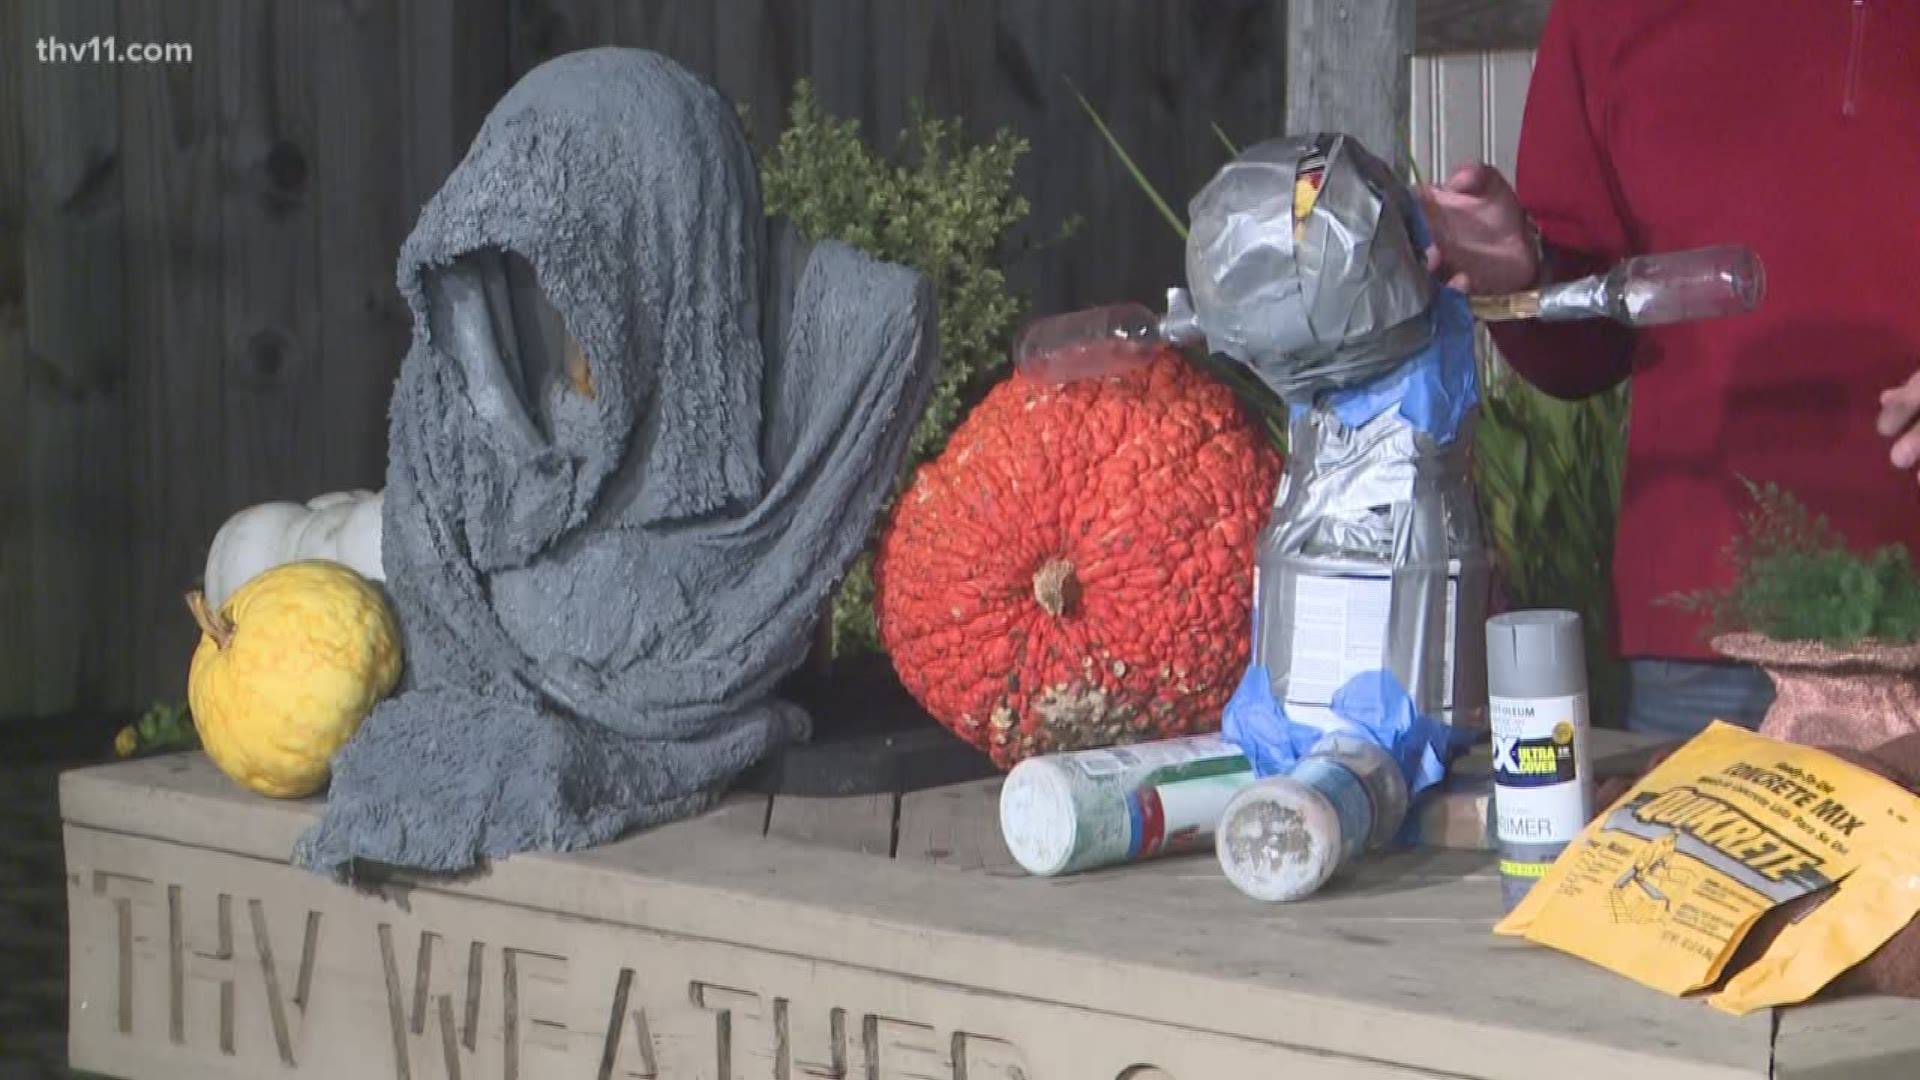 Chris H. Olsen shows how some towels and concrete can make a spooky outdoor man decoration for your home.